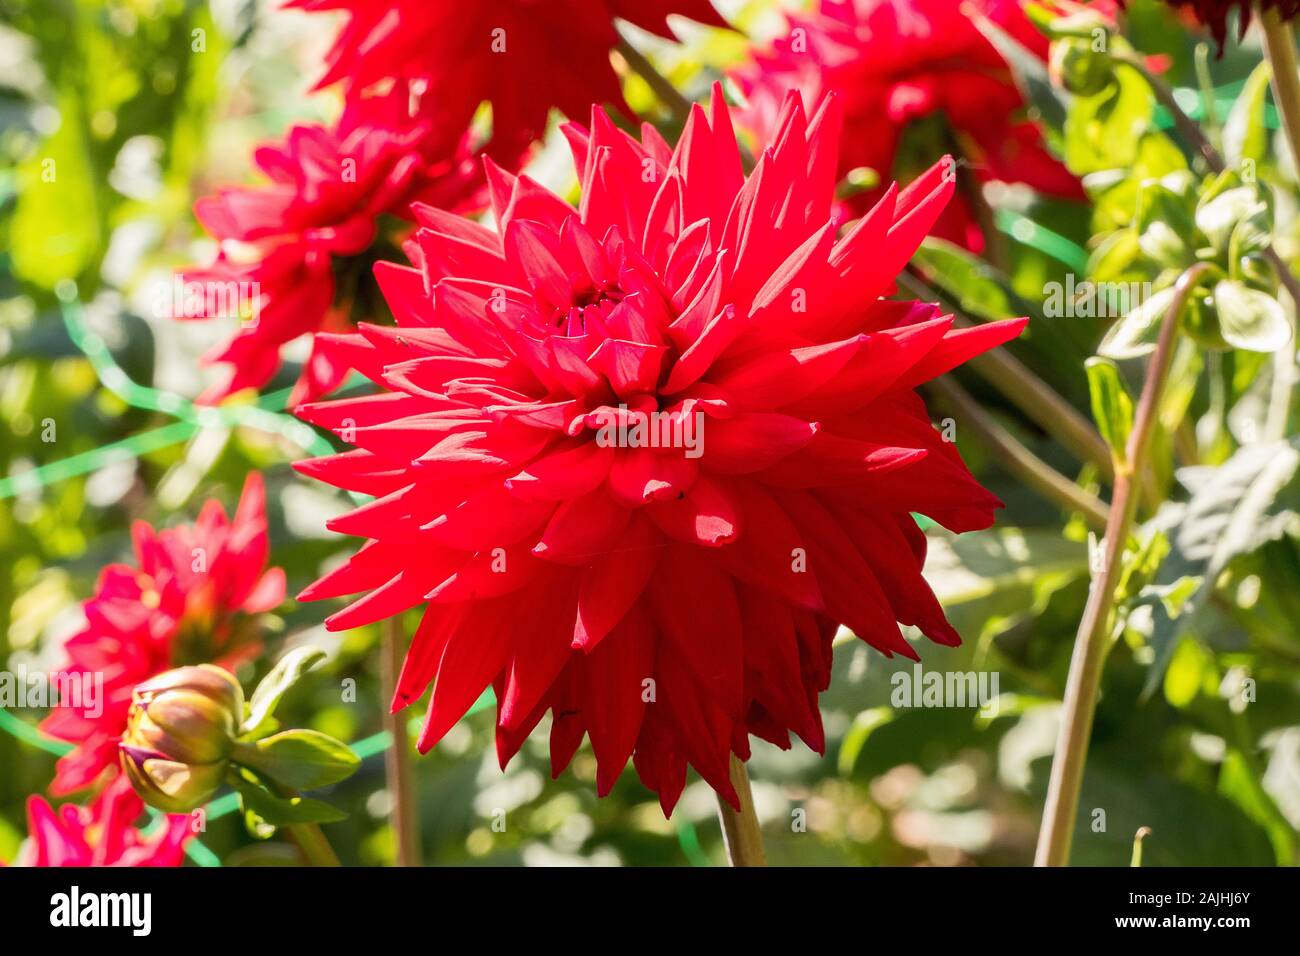 Bright red double flowers of Dahlia Wittemans Superba; in an English nursery garden in UK Stock Photo